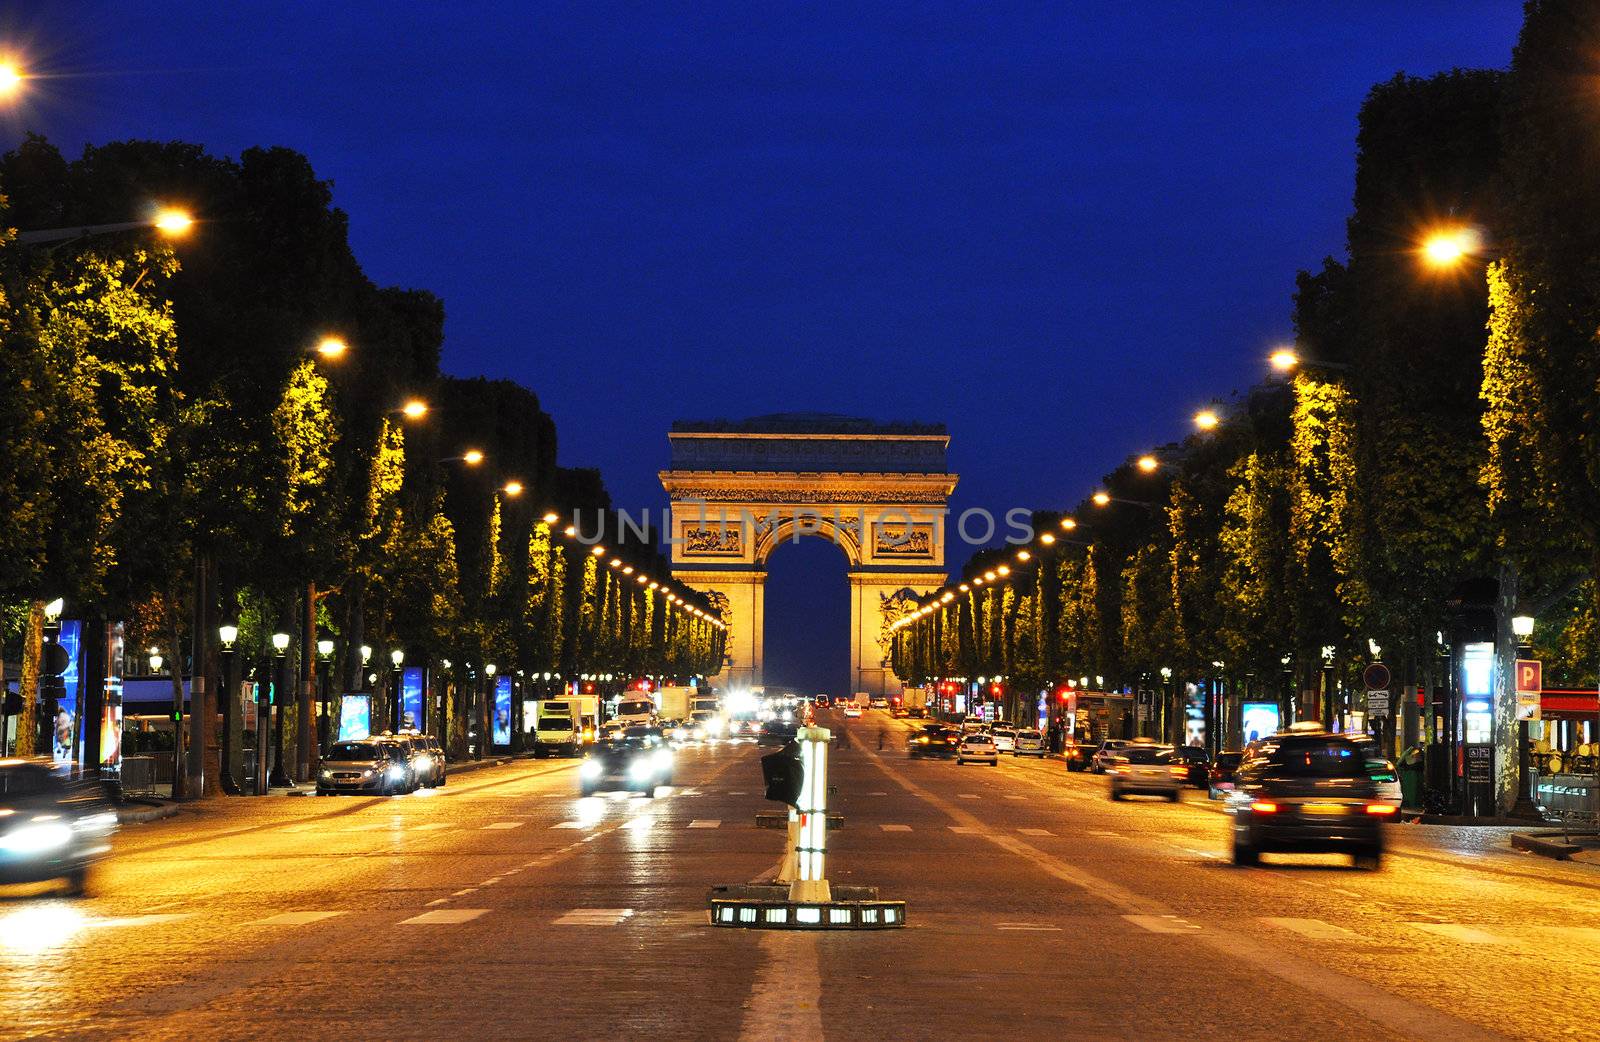 The Champs-Elysees at night in Paris, France